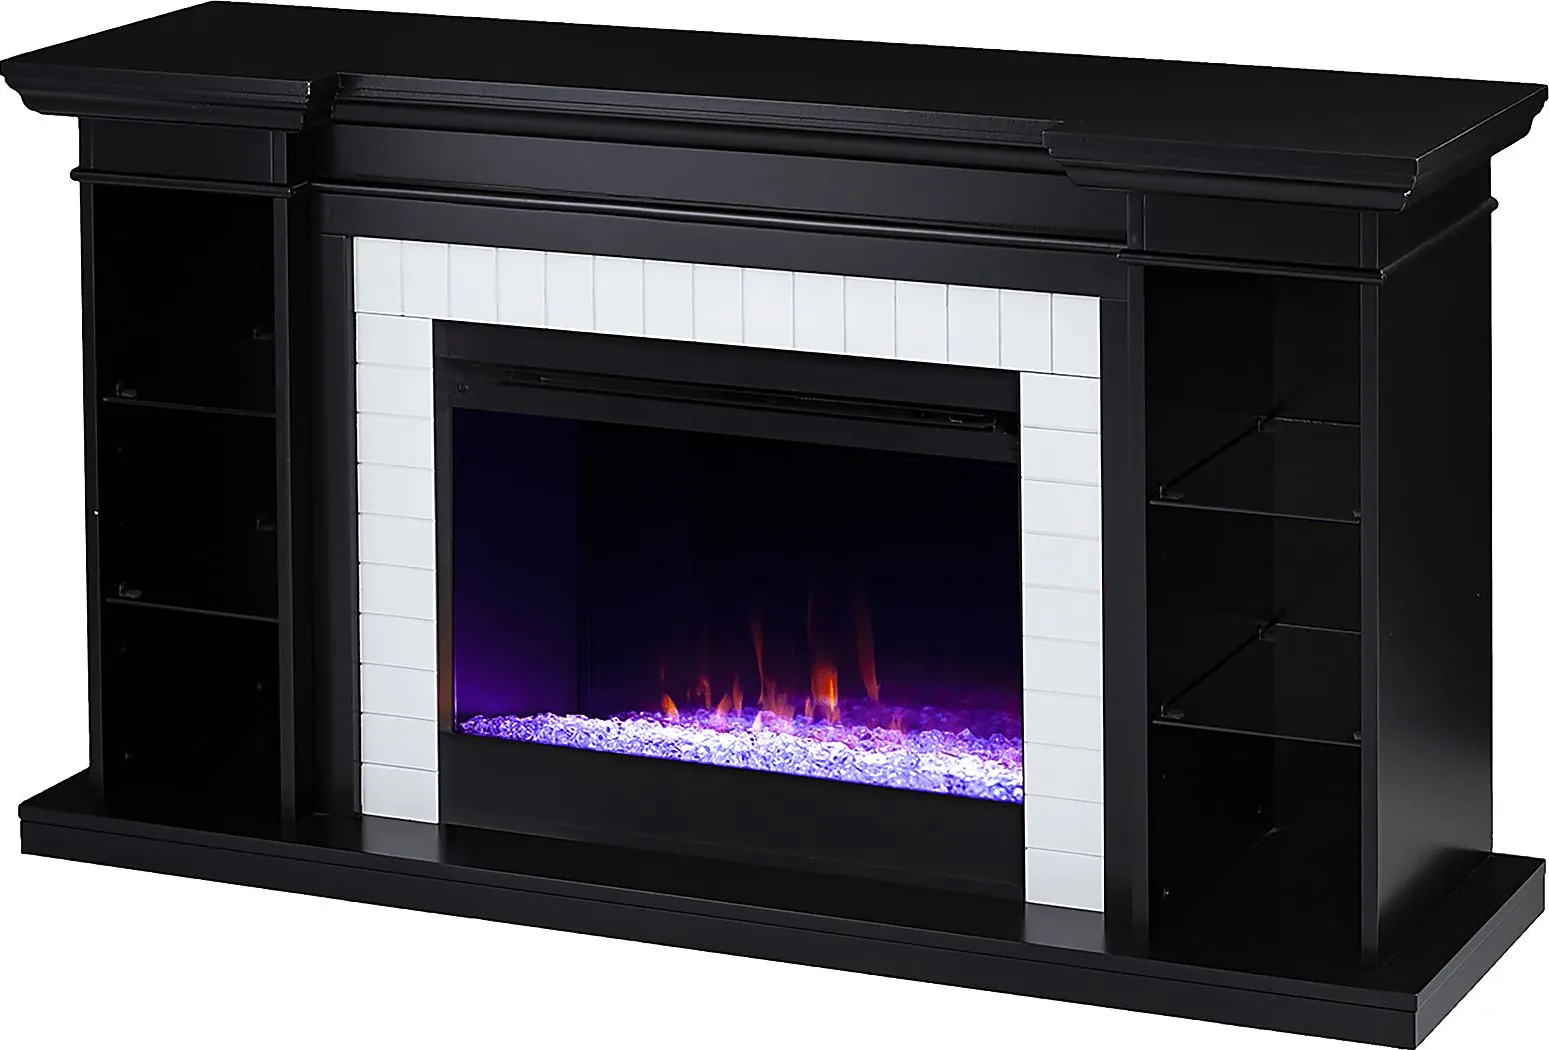 Tessman I Black 54 in. Console, With Color Changing Electric Fireplace